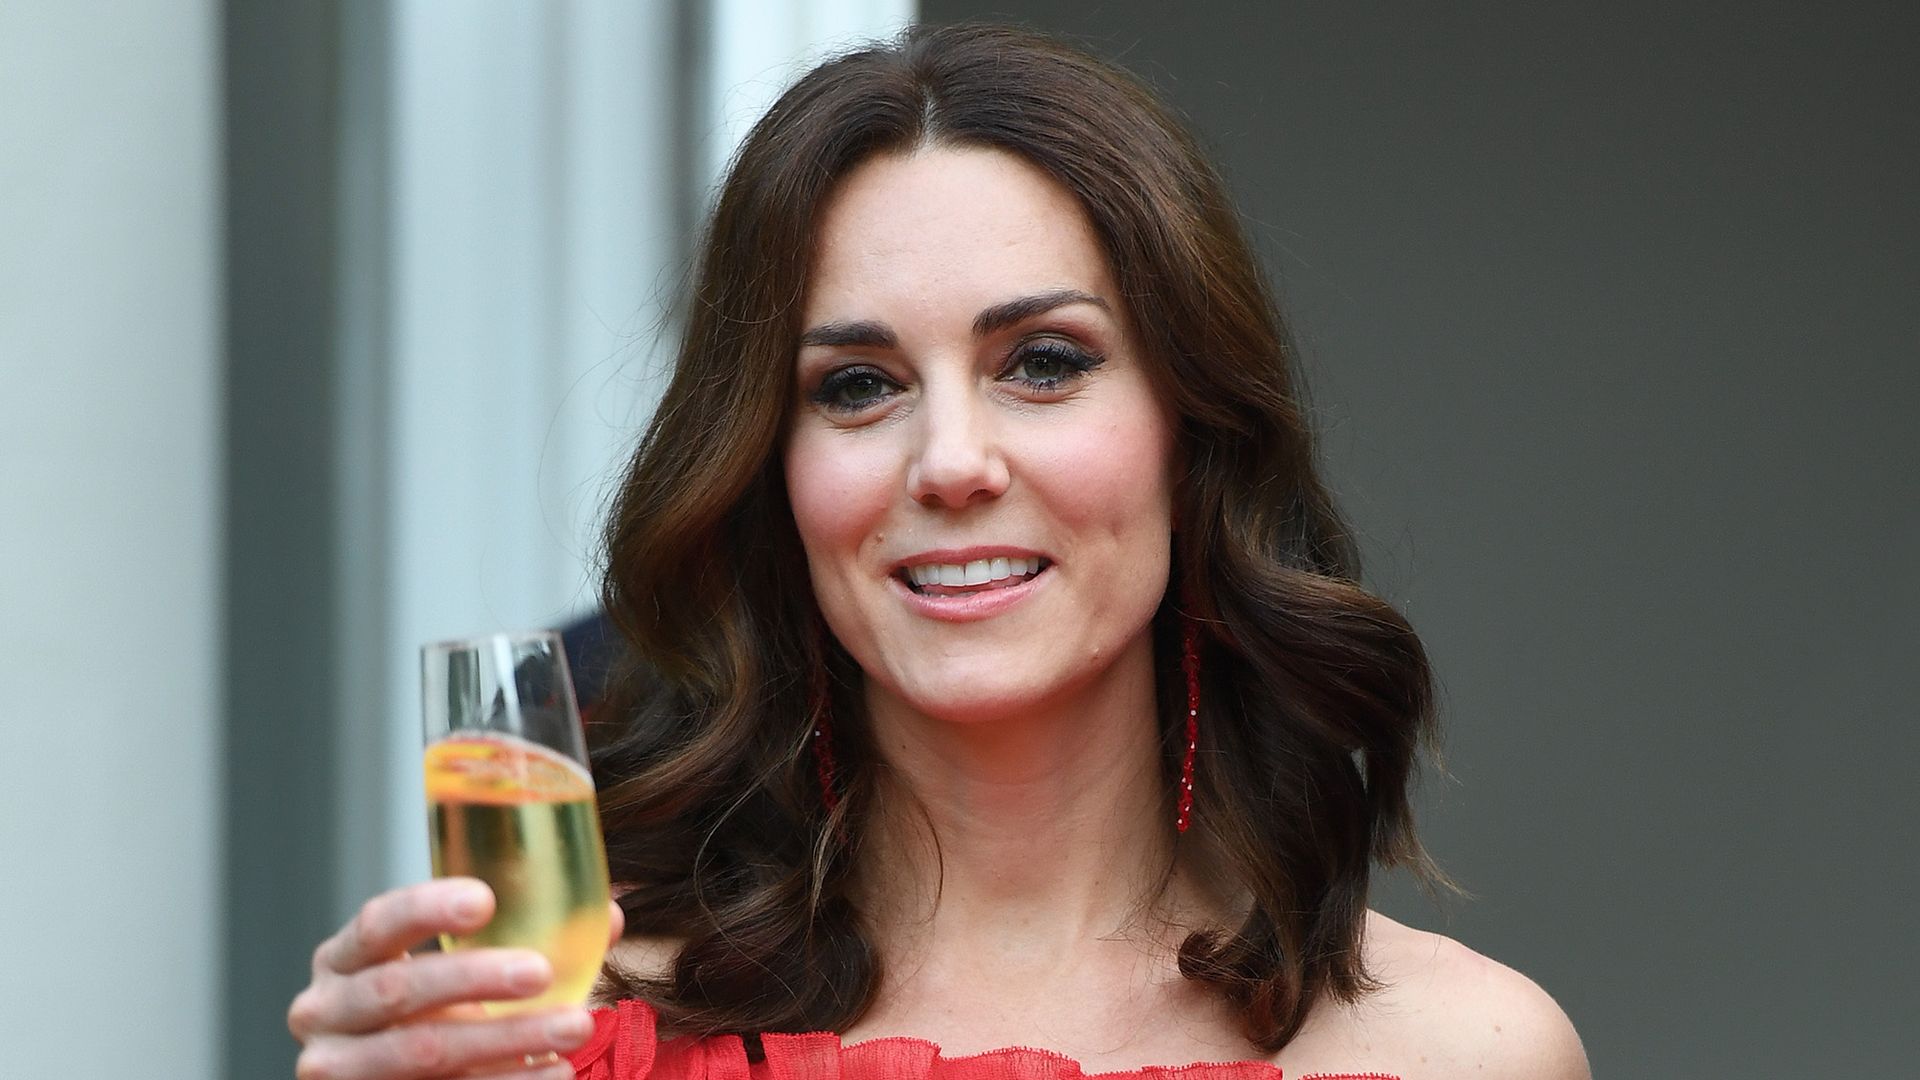 Kate Middleton wearing red dress raises a glass of champagne during The Queen's Birthday Party at the British Ambassadorial Residenceduring an official visit to Poland and Germany on July 19, 2017 i